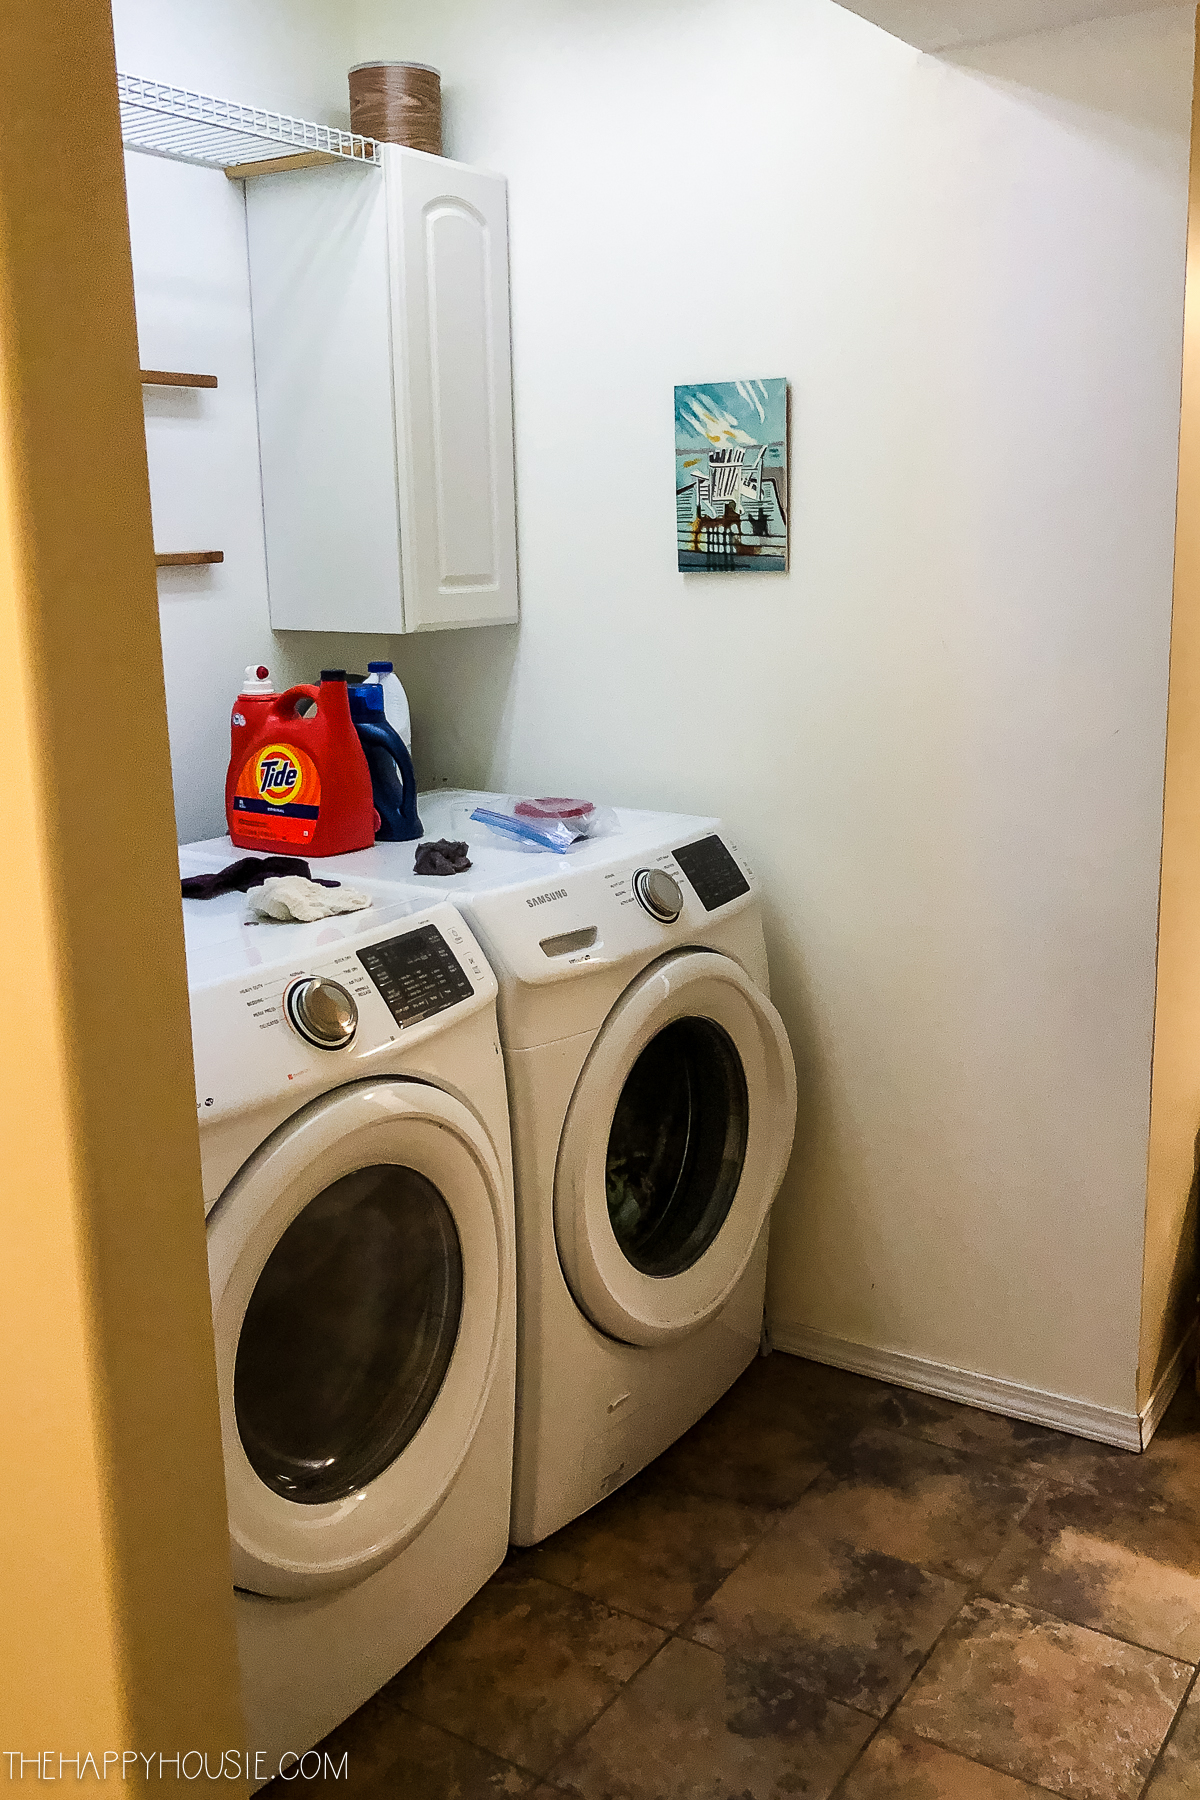 A washer and dryer in the alcove.